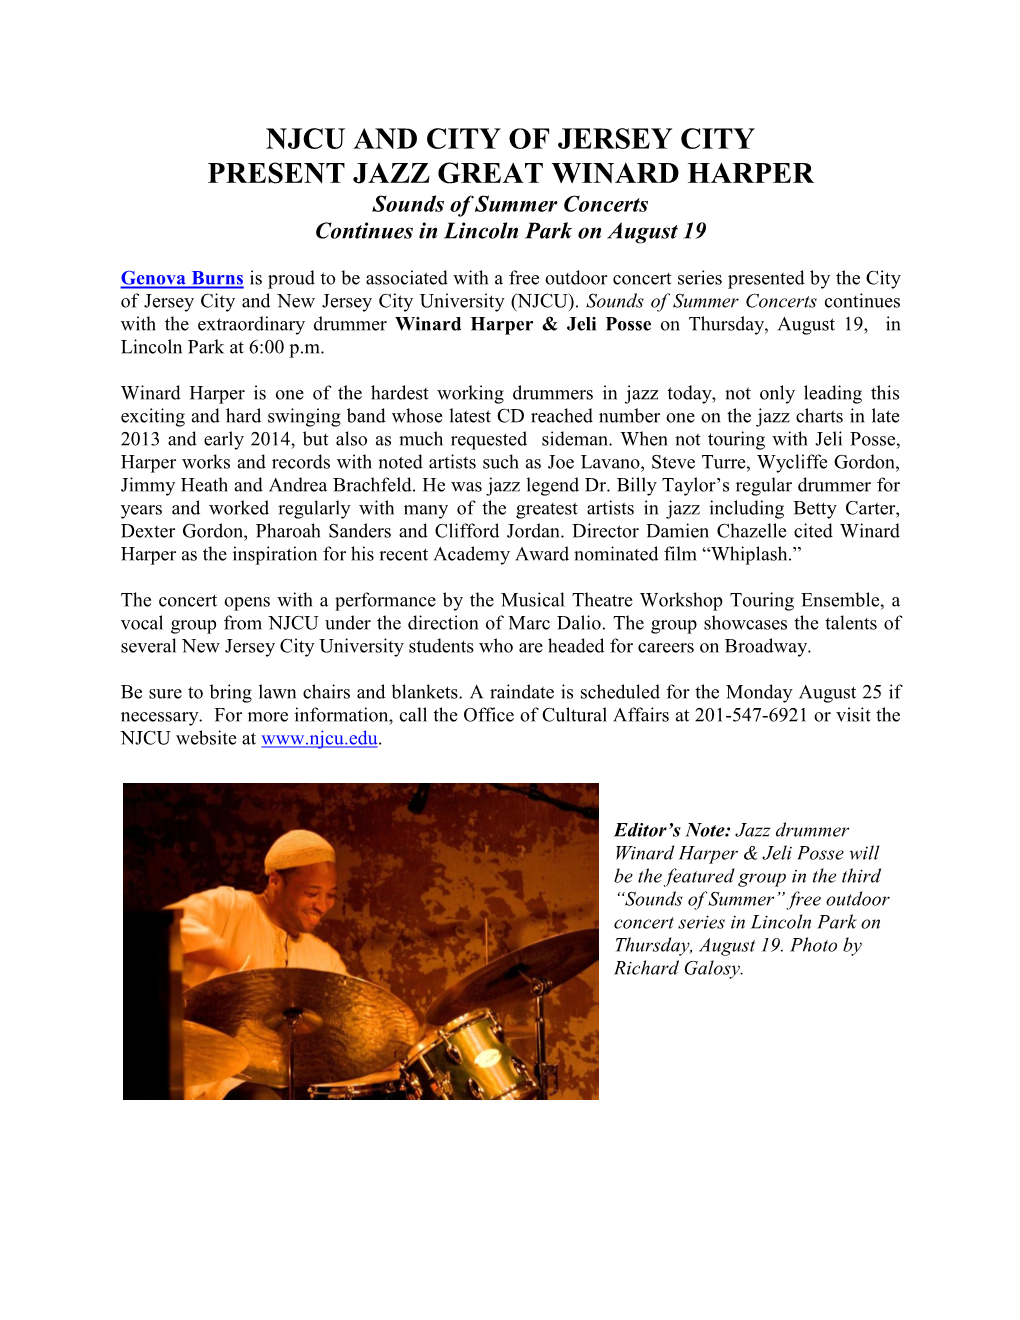 NJCU and CITY of JERSEY CITY PRESENT JAZZ GREAT WINARD HARPER Sounds of Summer Concerts Continues in Lincoln Park on August 19